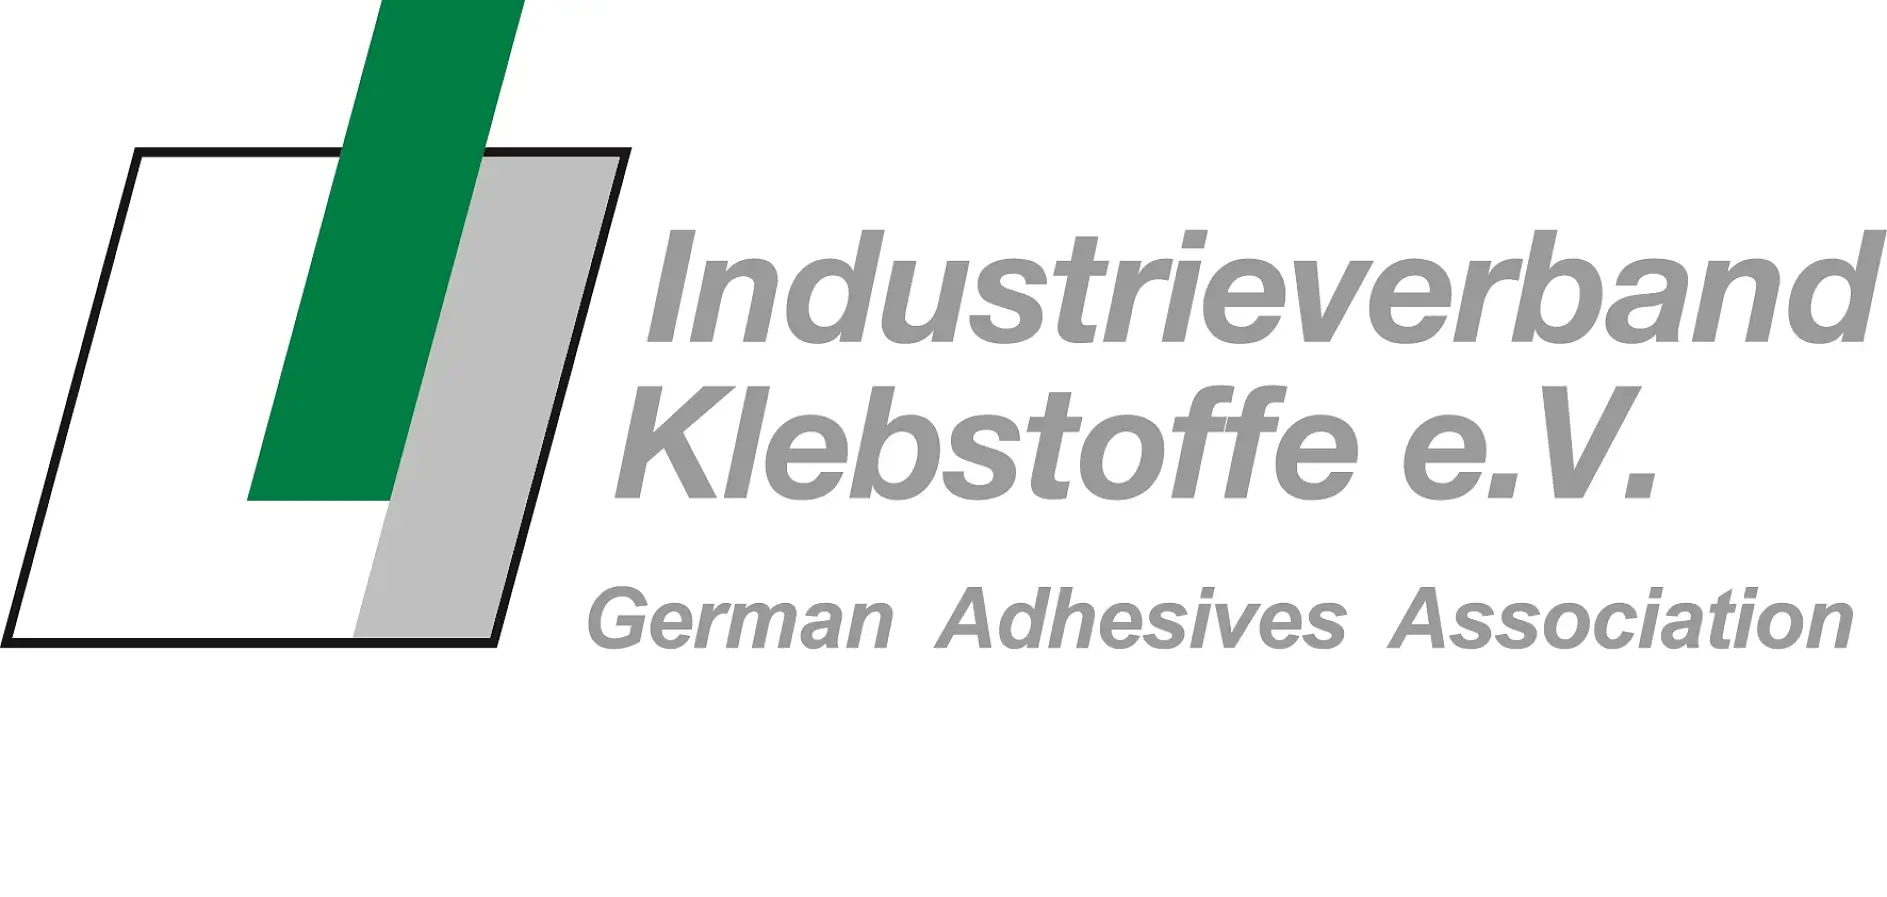 The German Adhesives Association is the world’s largest and - with respect to its broad service portfolio - at the same time the world’s leading national organisation in the field of adhesives bonding technology.